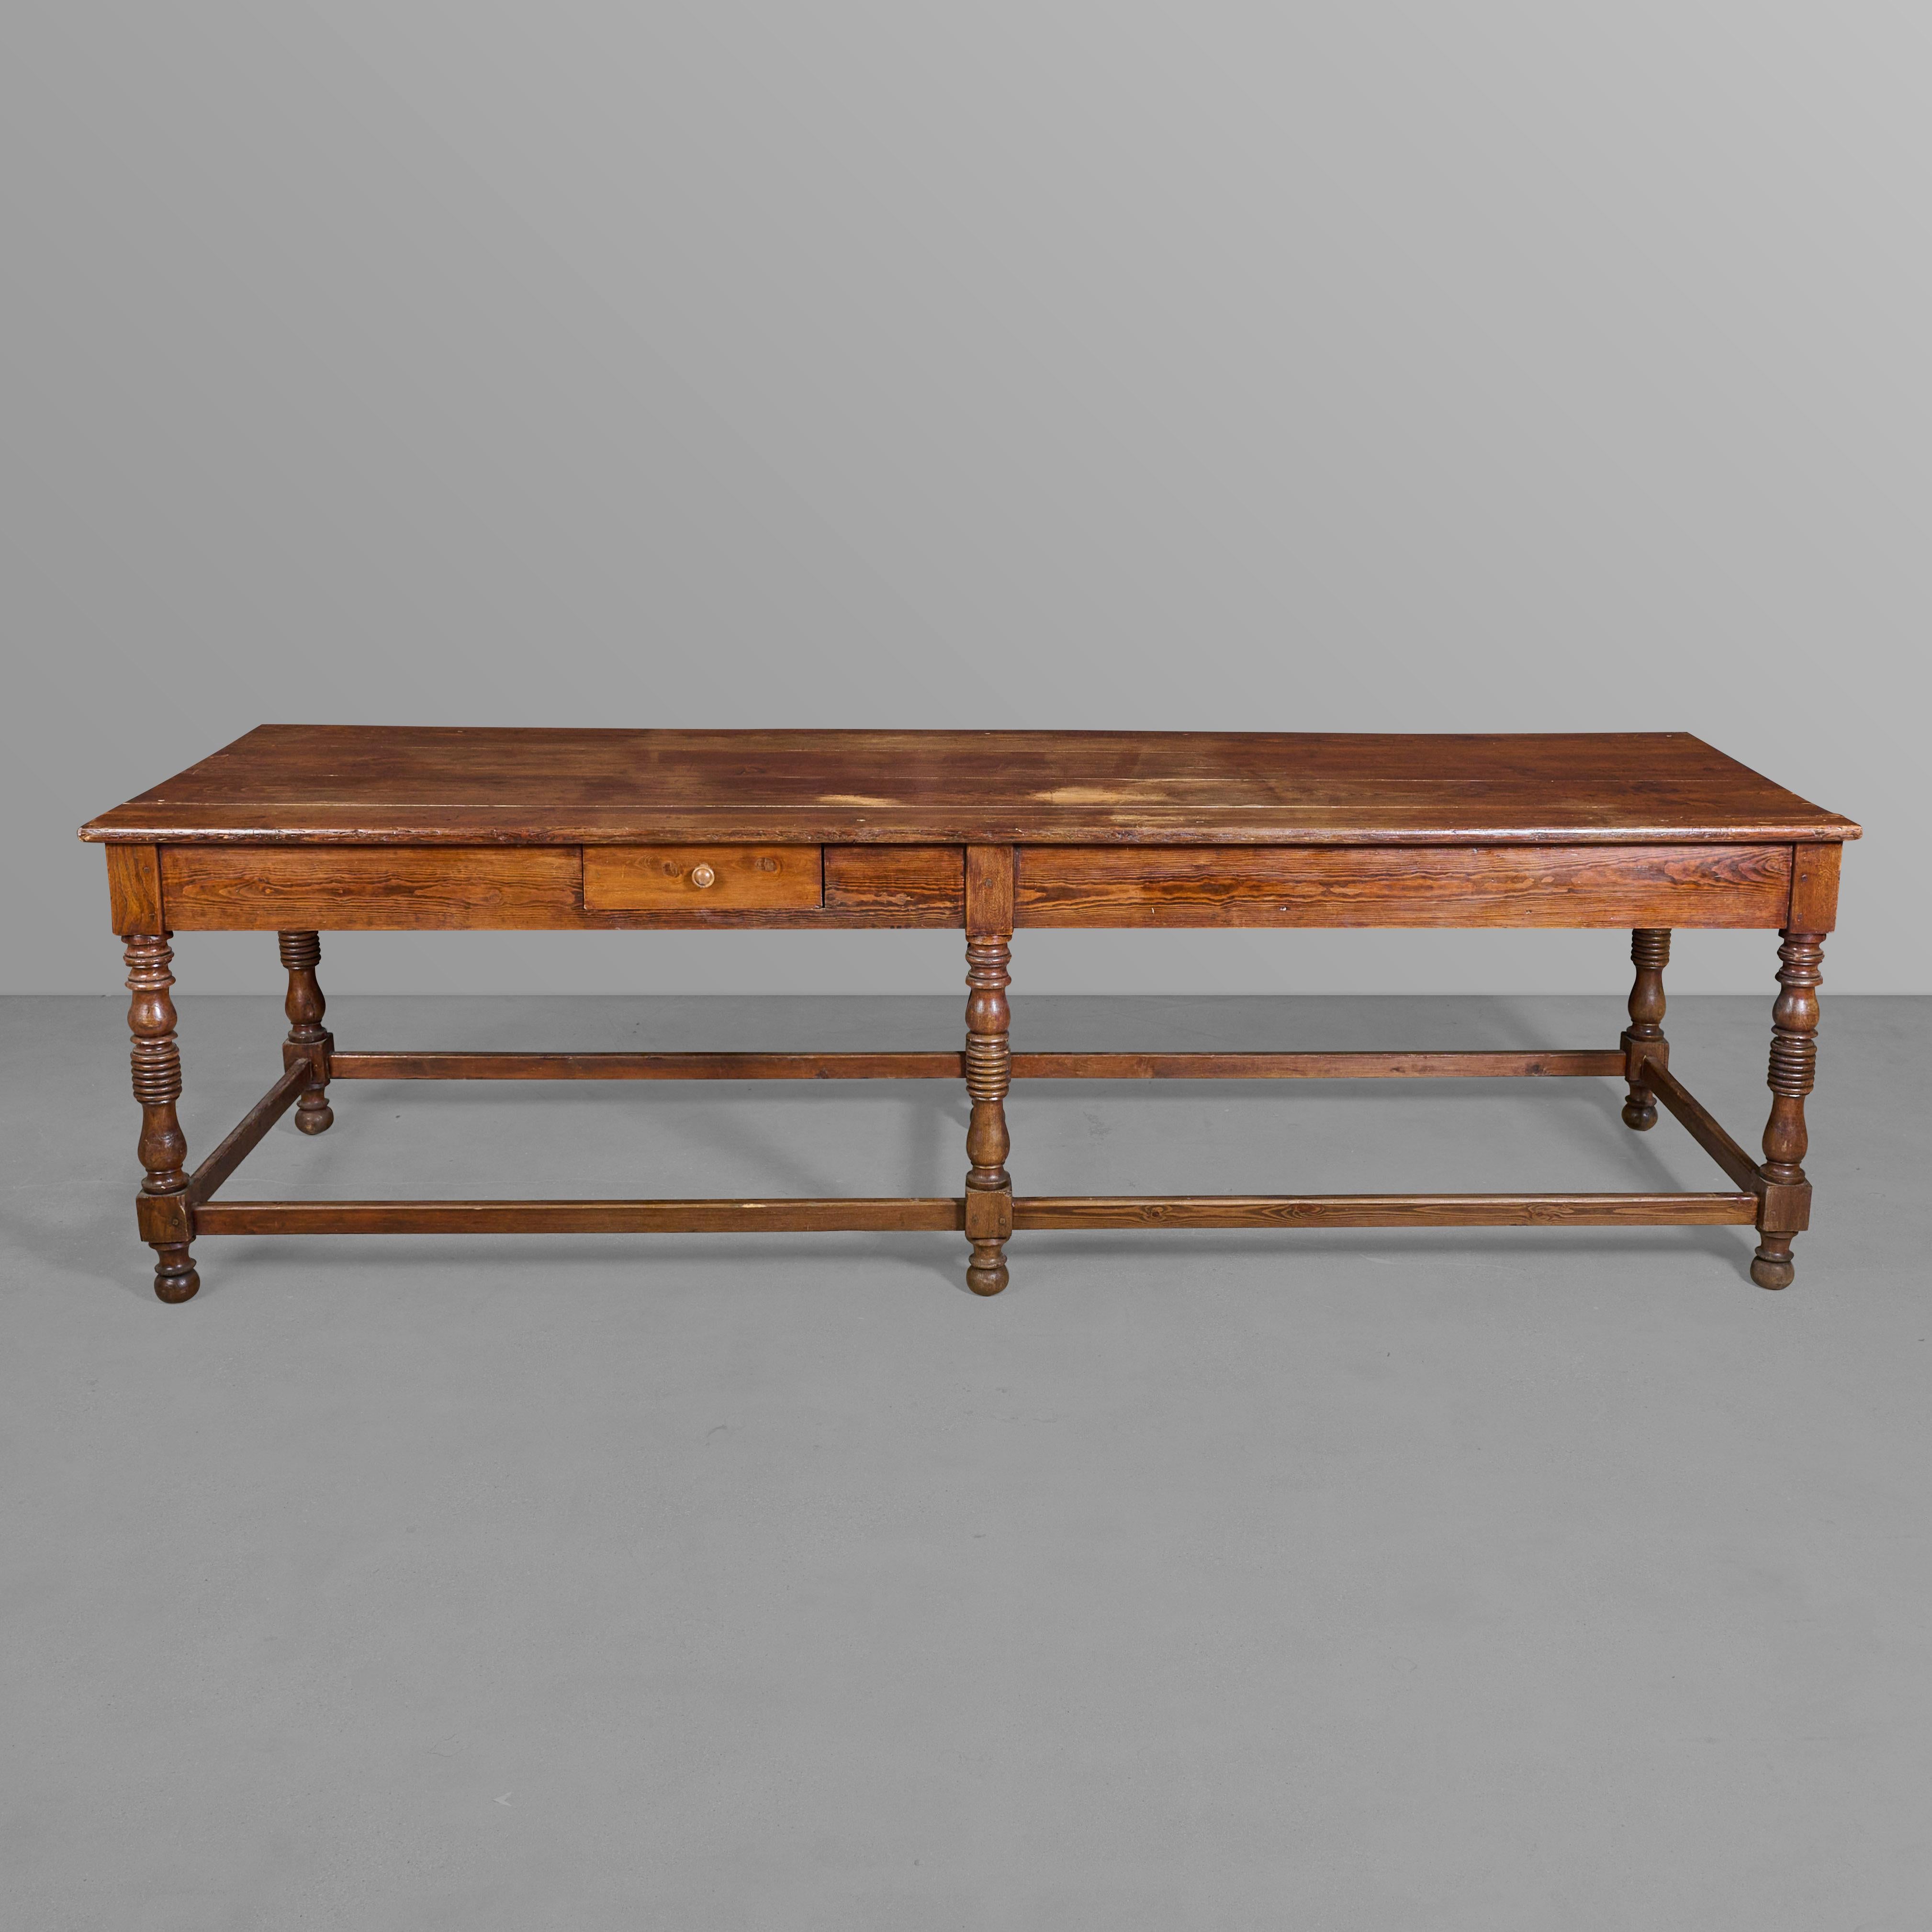 Pine tailor table with two drawers, great legs, and a wonderful patina.

